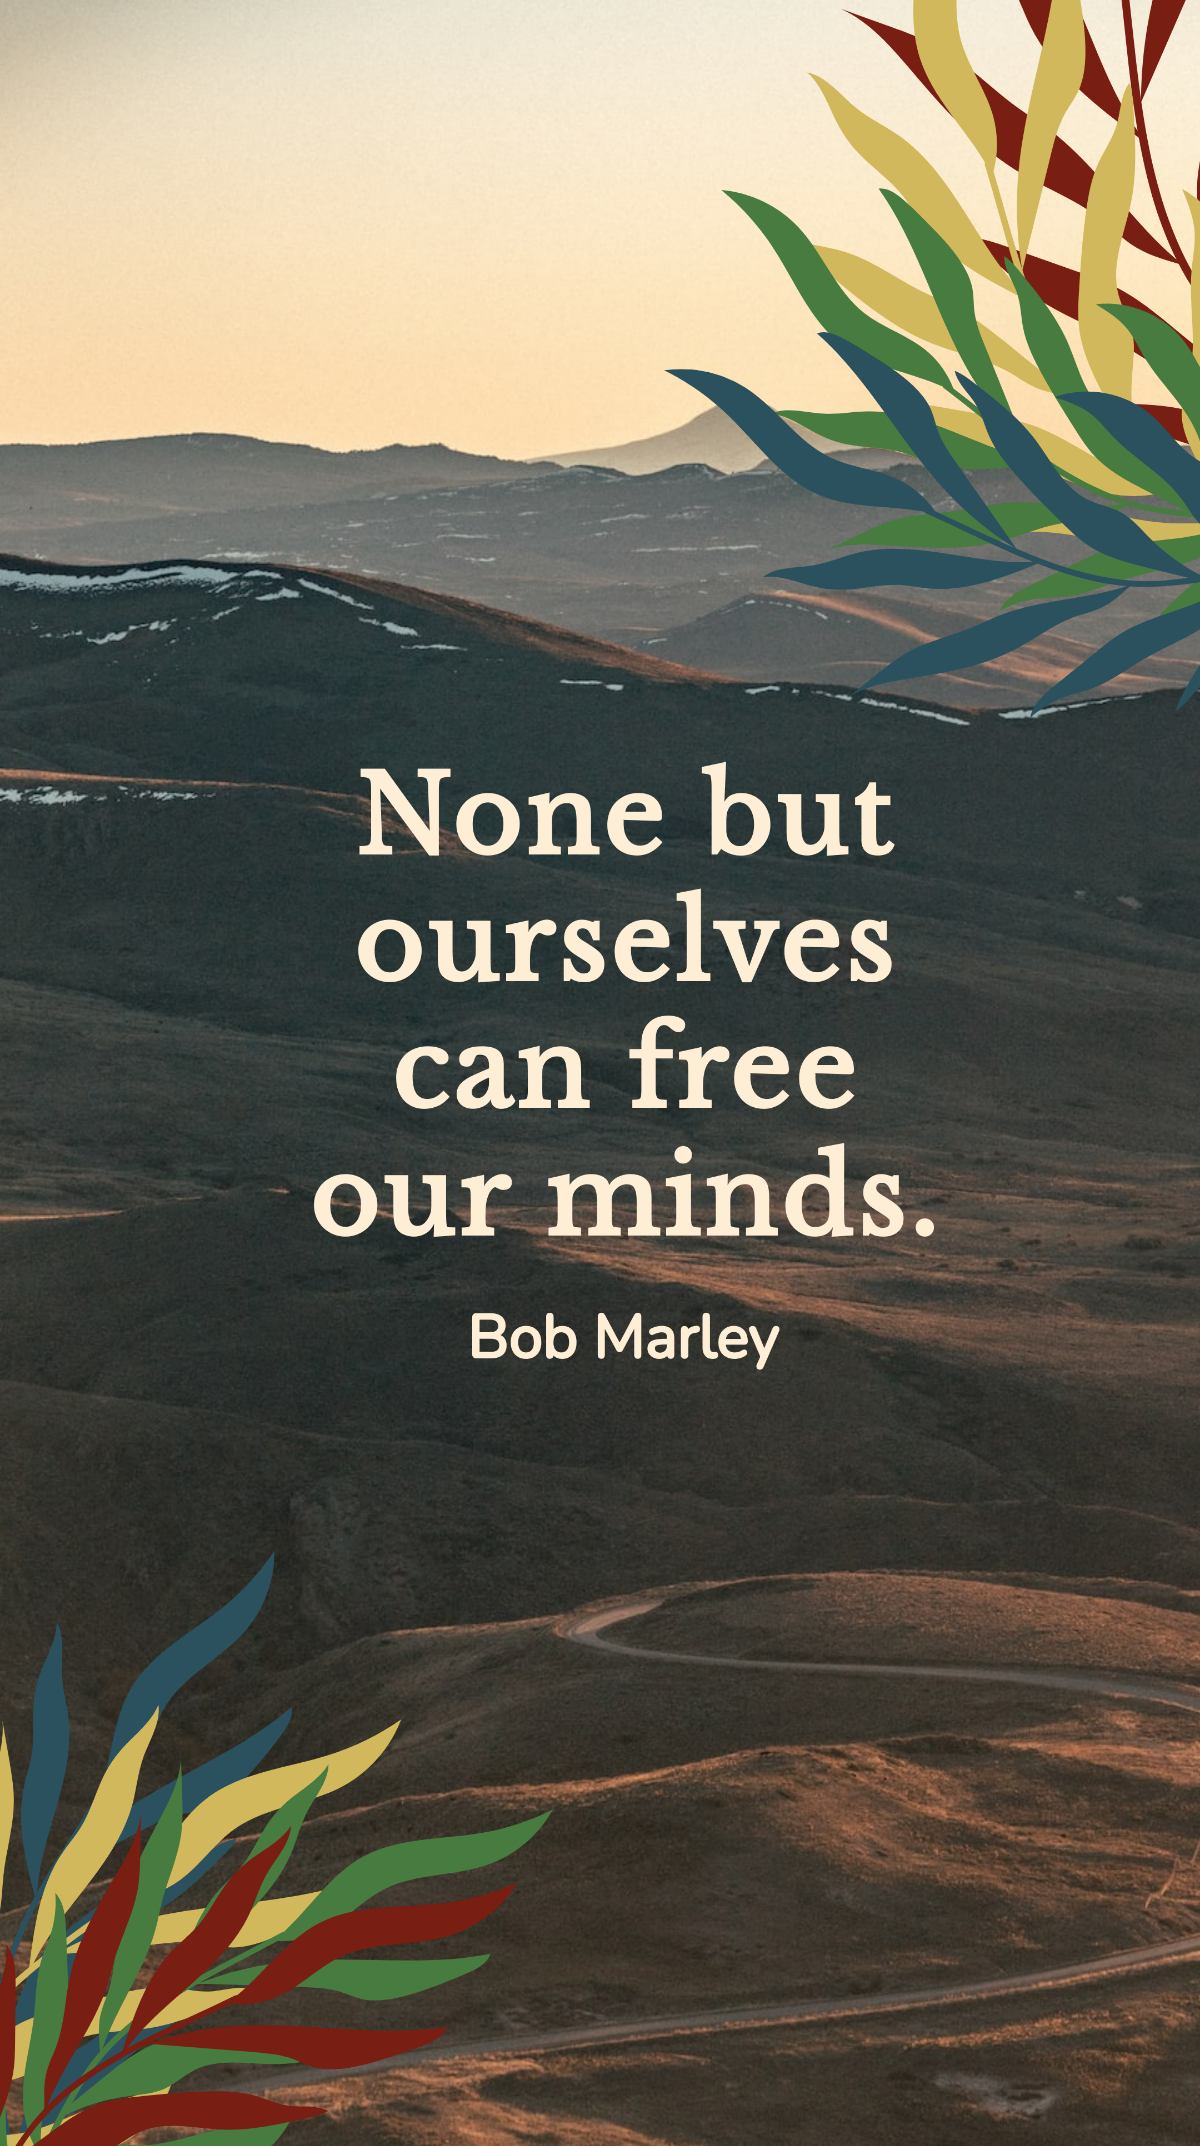 Bob Marley - None but ourselves can our minds. Template